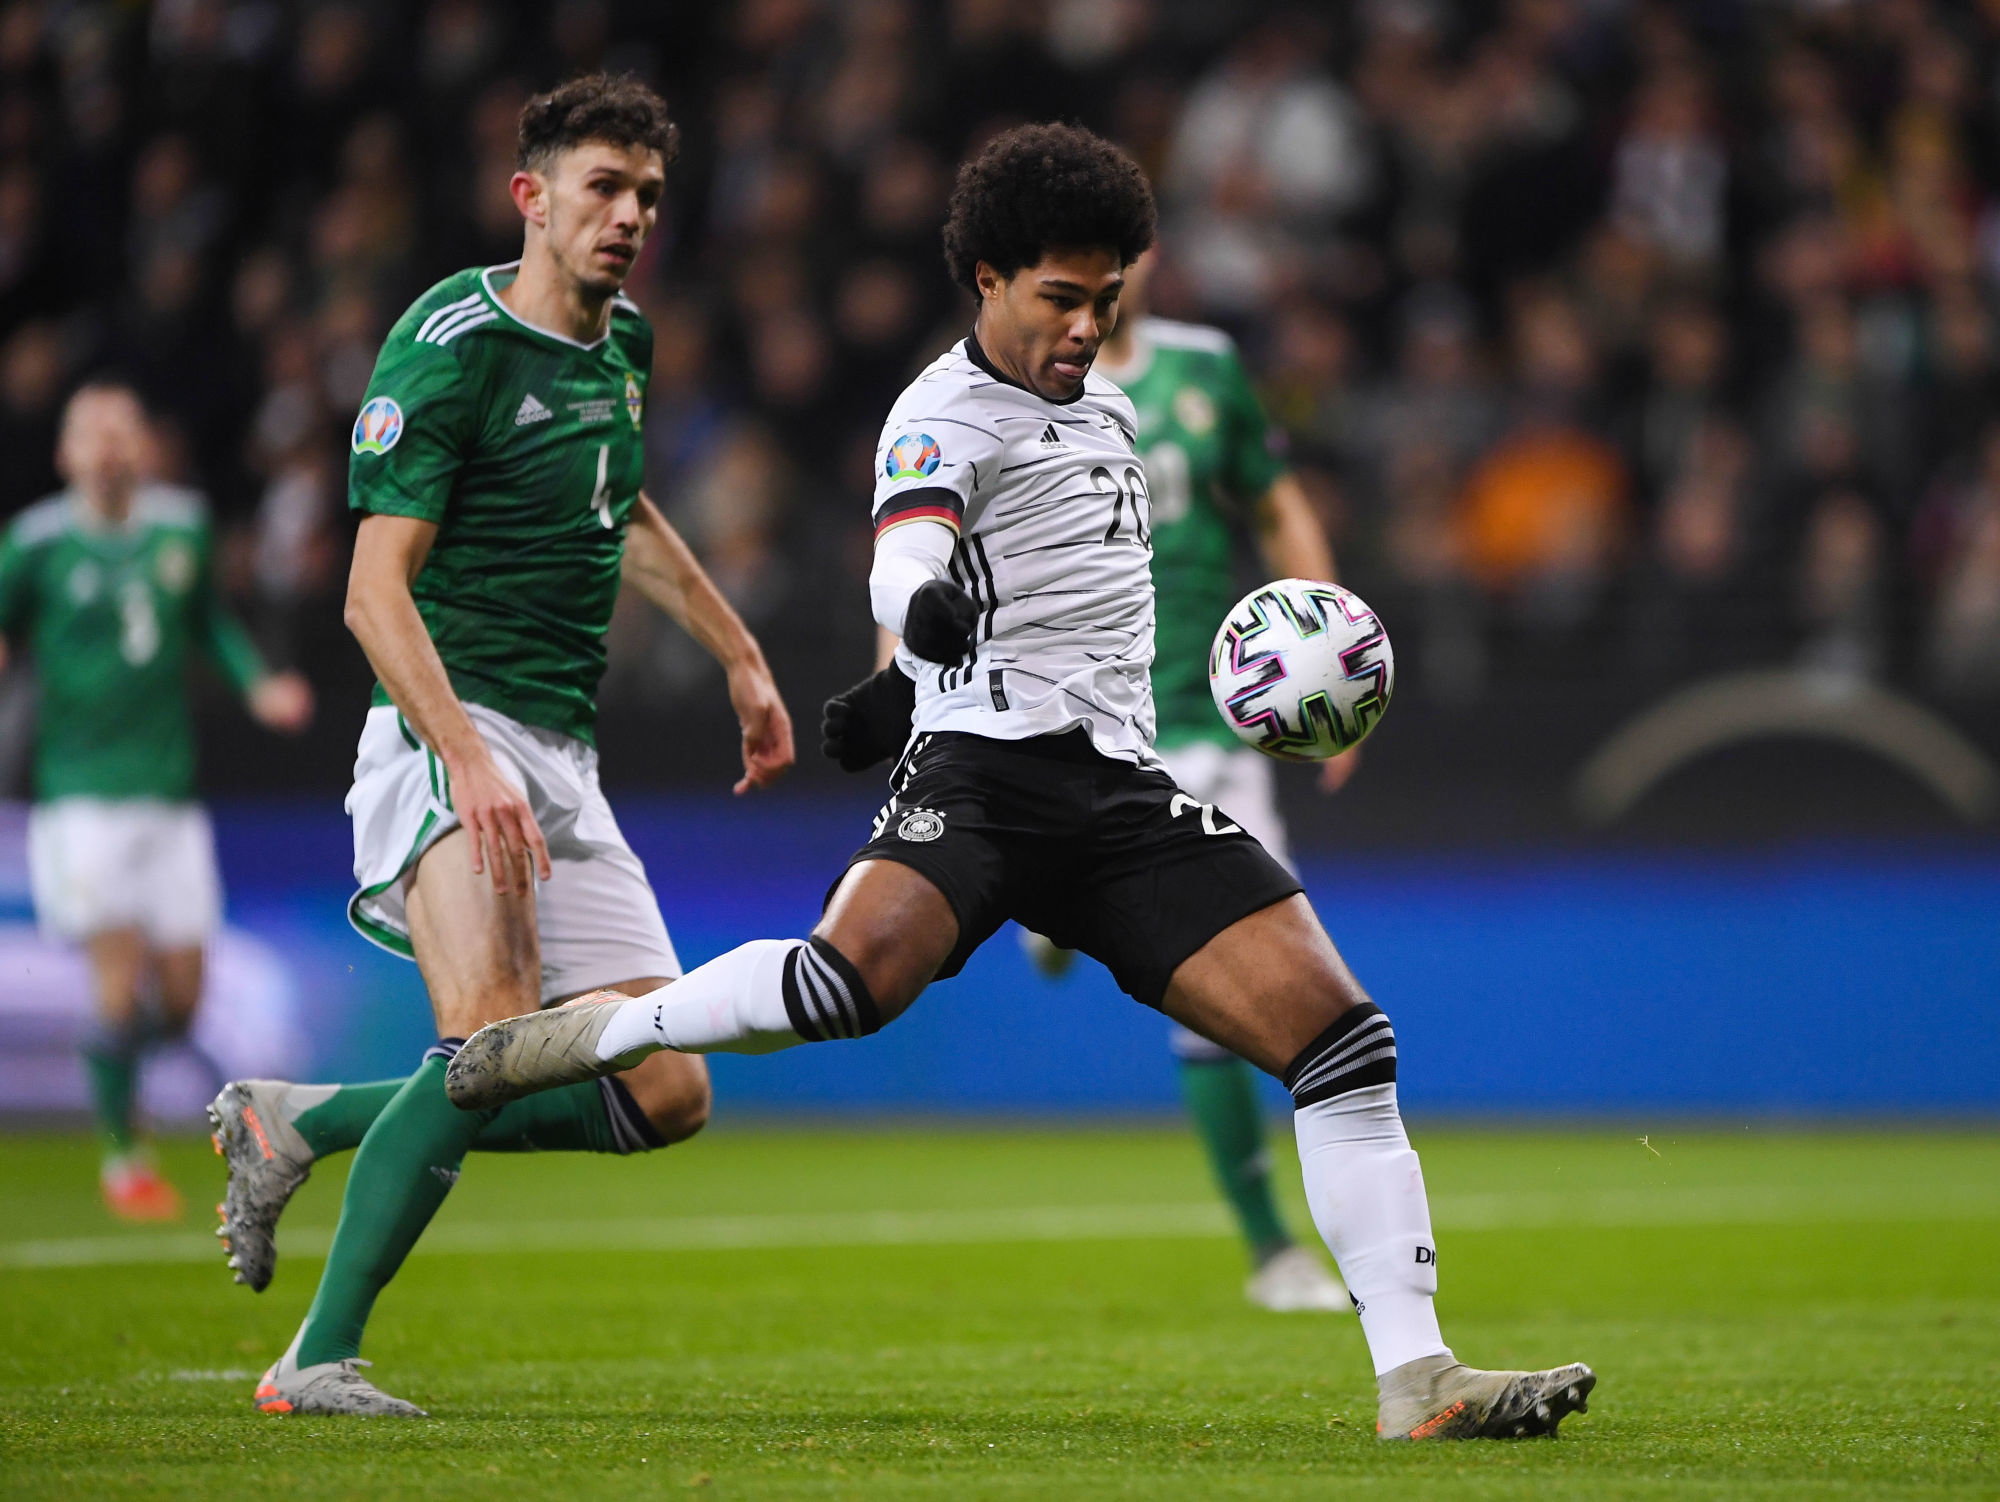 Tom Flanagan (Northern Ireland, l) vs. Serge Gnabry (Germany, r) GES / Soccer / EURO Qualification: Germany - Northern Ireland, 19.11.2019 Football / Soccer: European Qualifiers: Germany vs. Northern Ireland, Location, November 19, 2019 | usage worldwide 

Photo by Icon Sport - Commerzbank-Arena - Francfort (Allemagne)